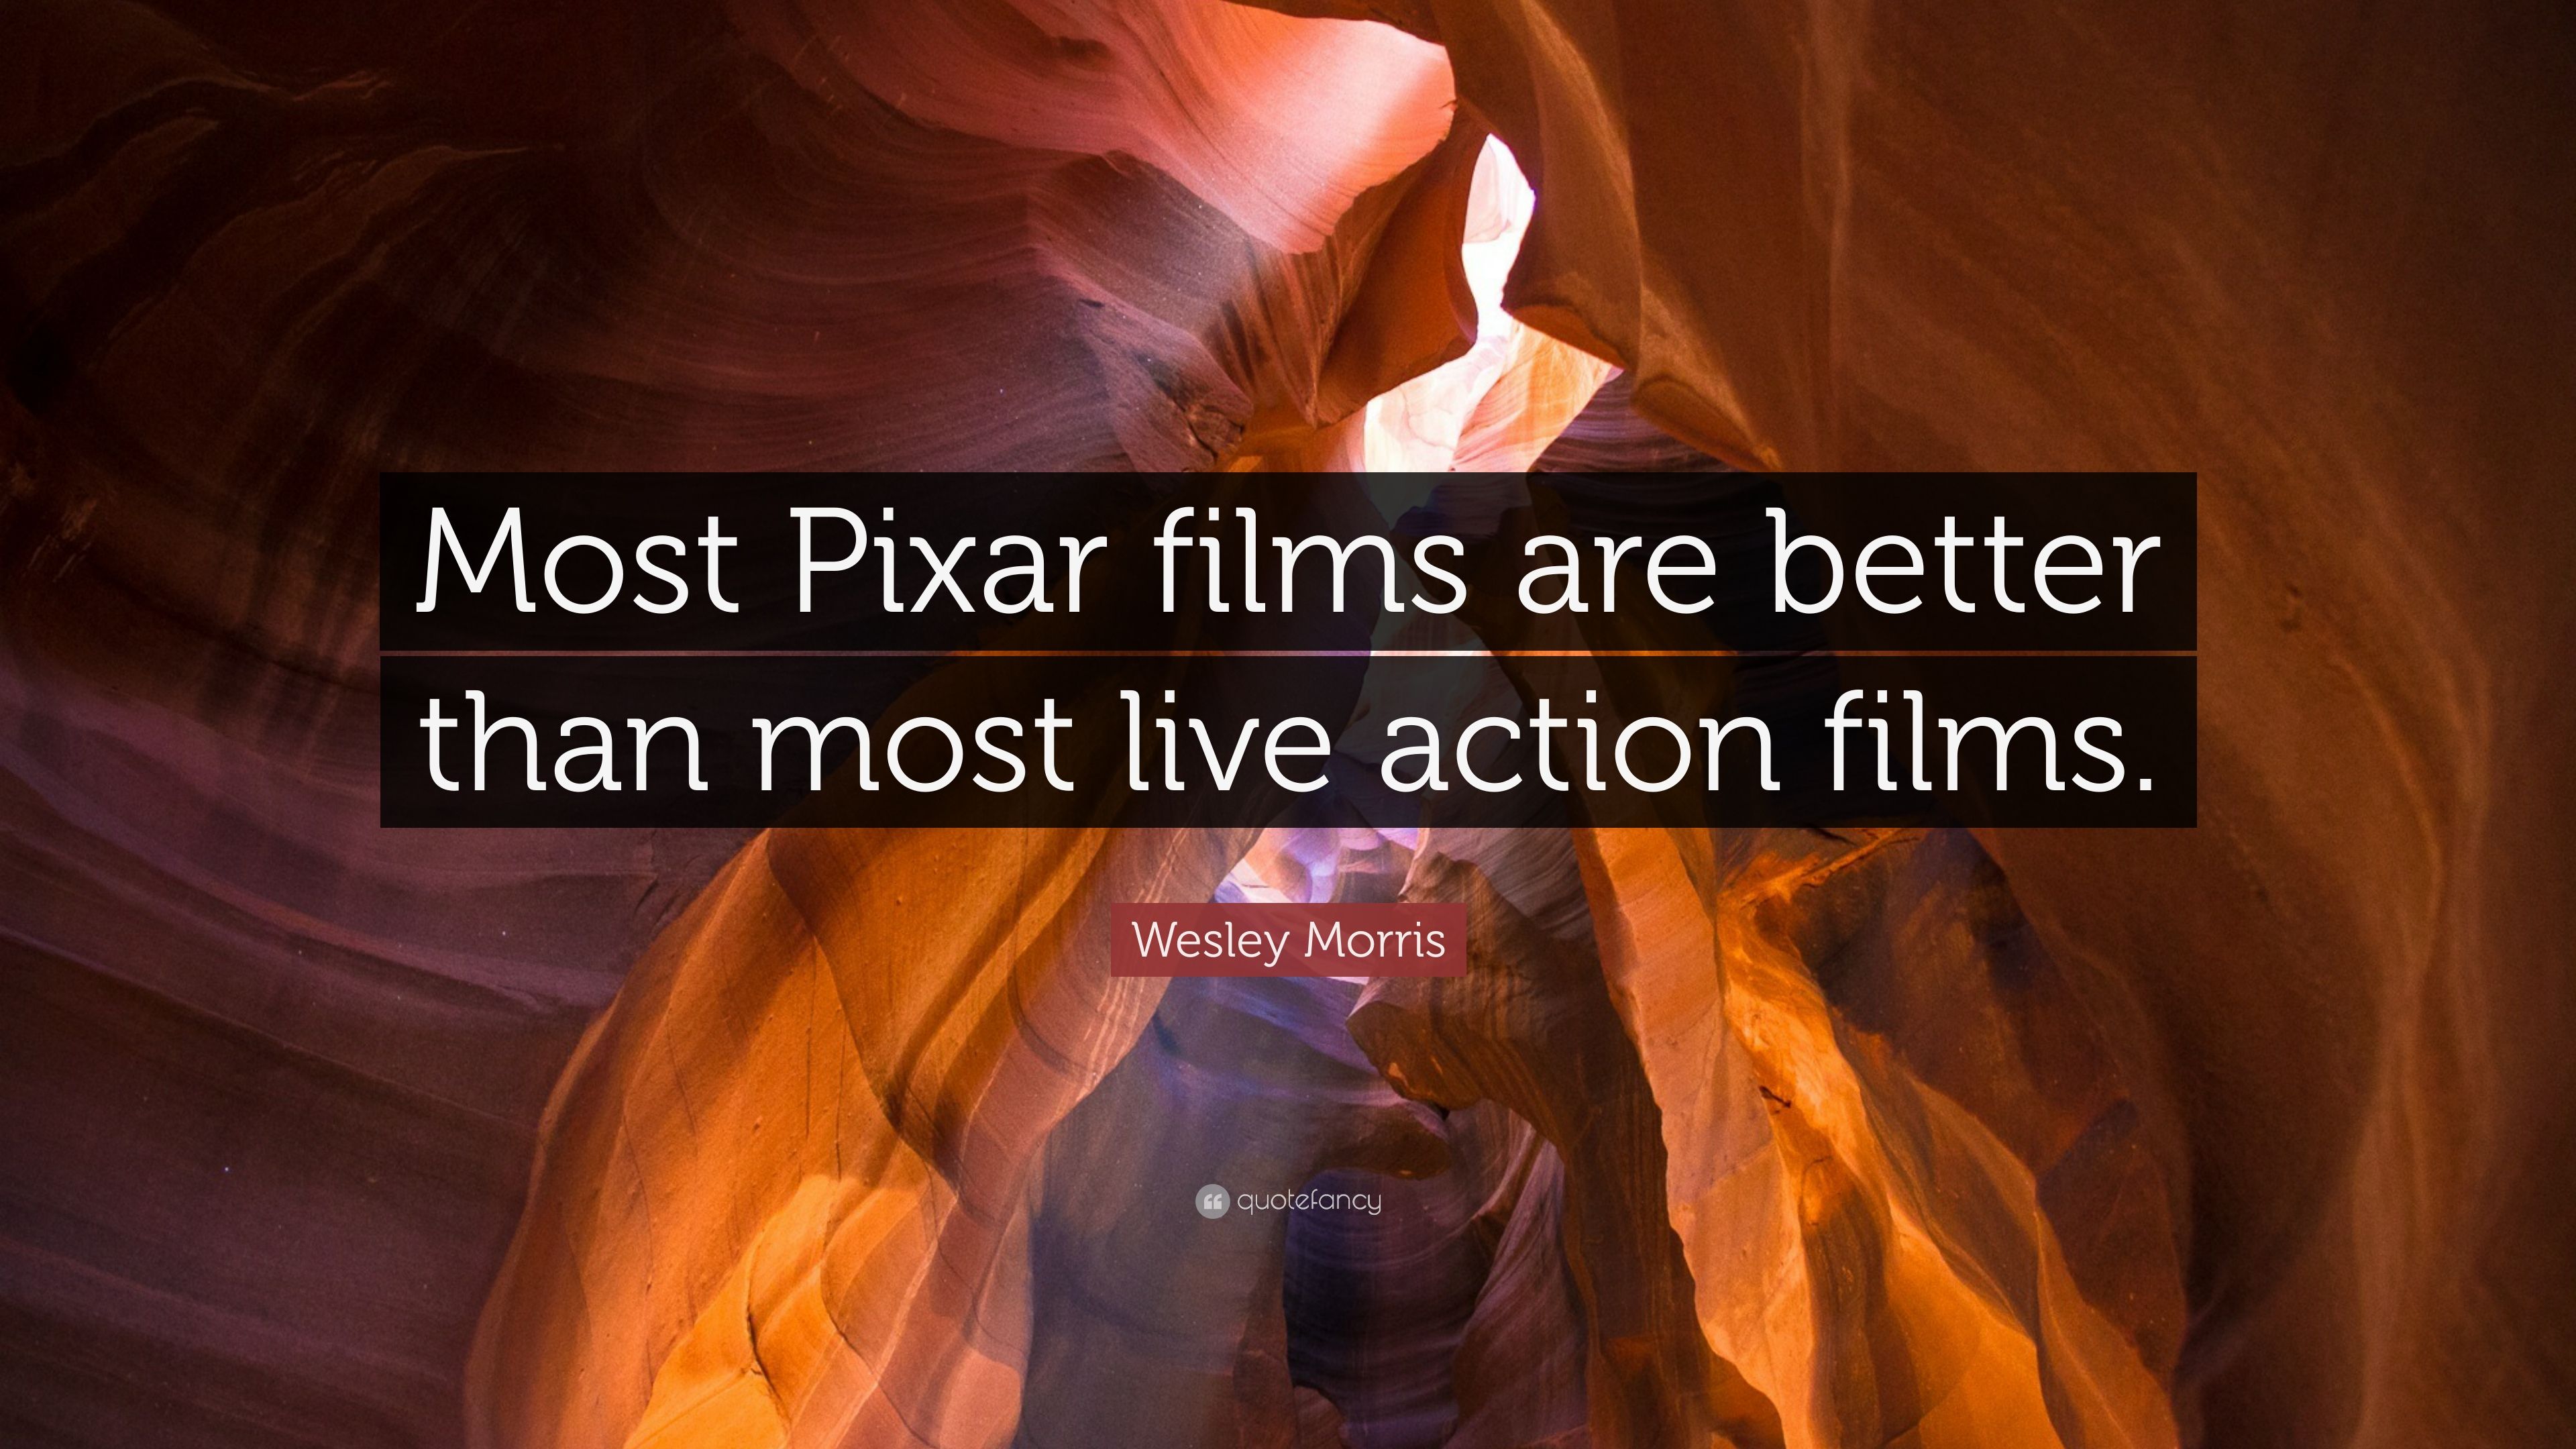 Wesley Morris Quote: “Most Pixar films are better than most live action films.” (7 wallpaper)